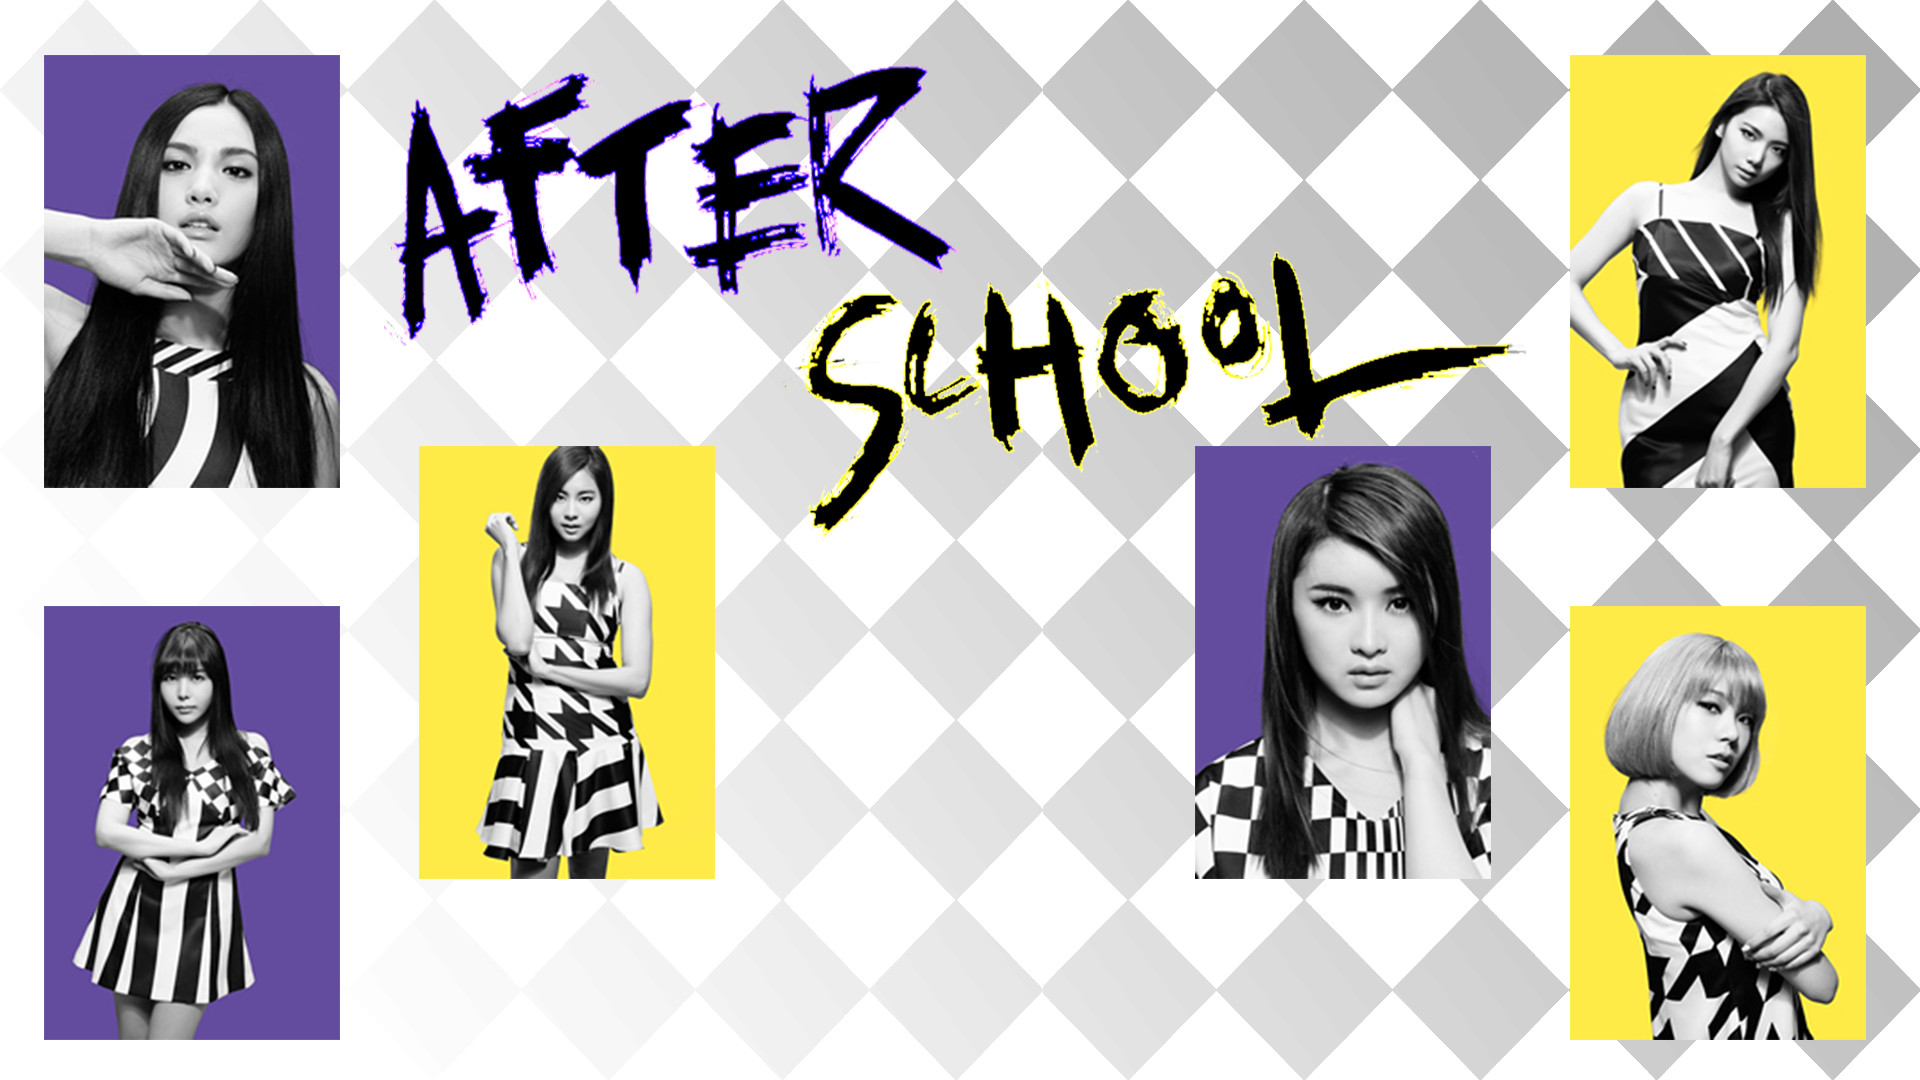 1920x1080 ... After School Dress To Kill Wallpaper 2016 Line-Up by SwePlaygirl